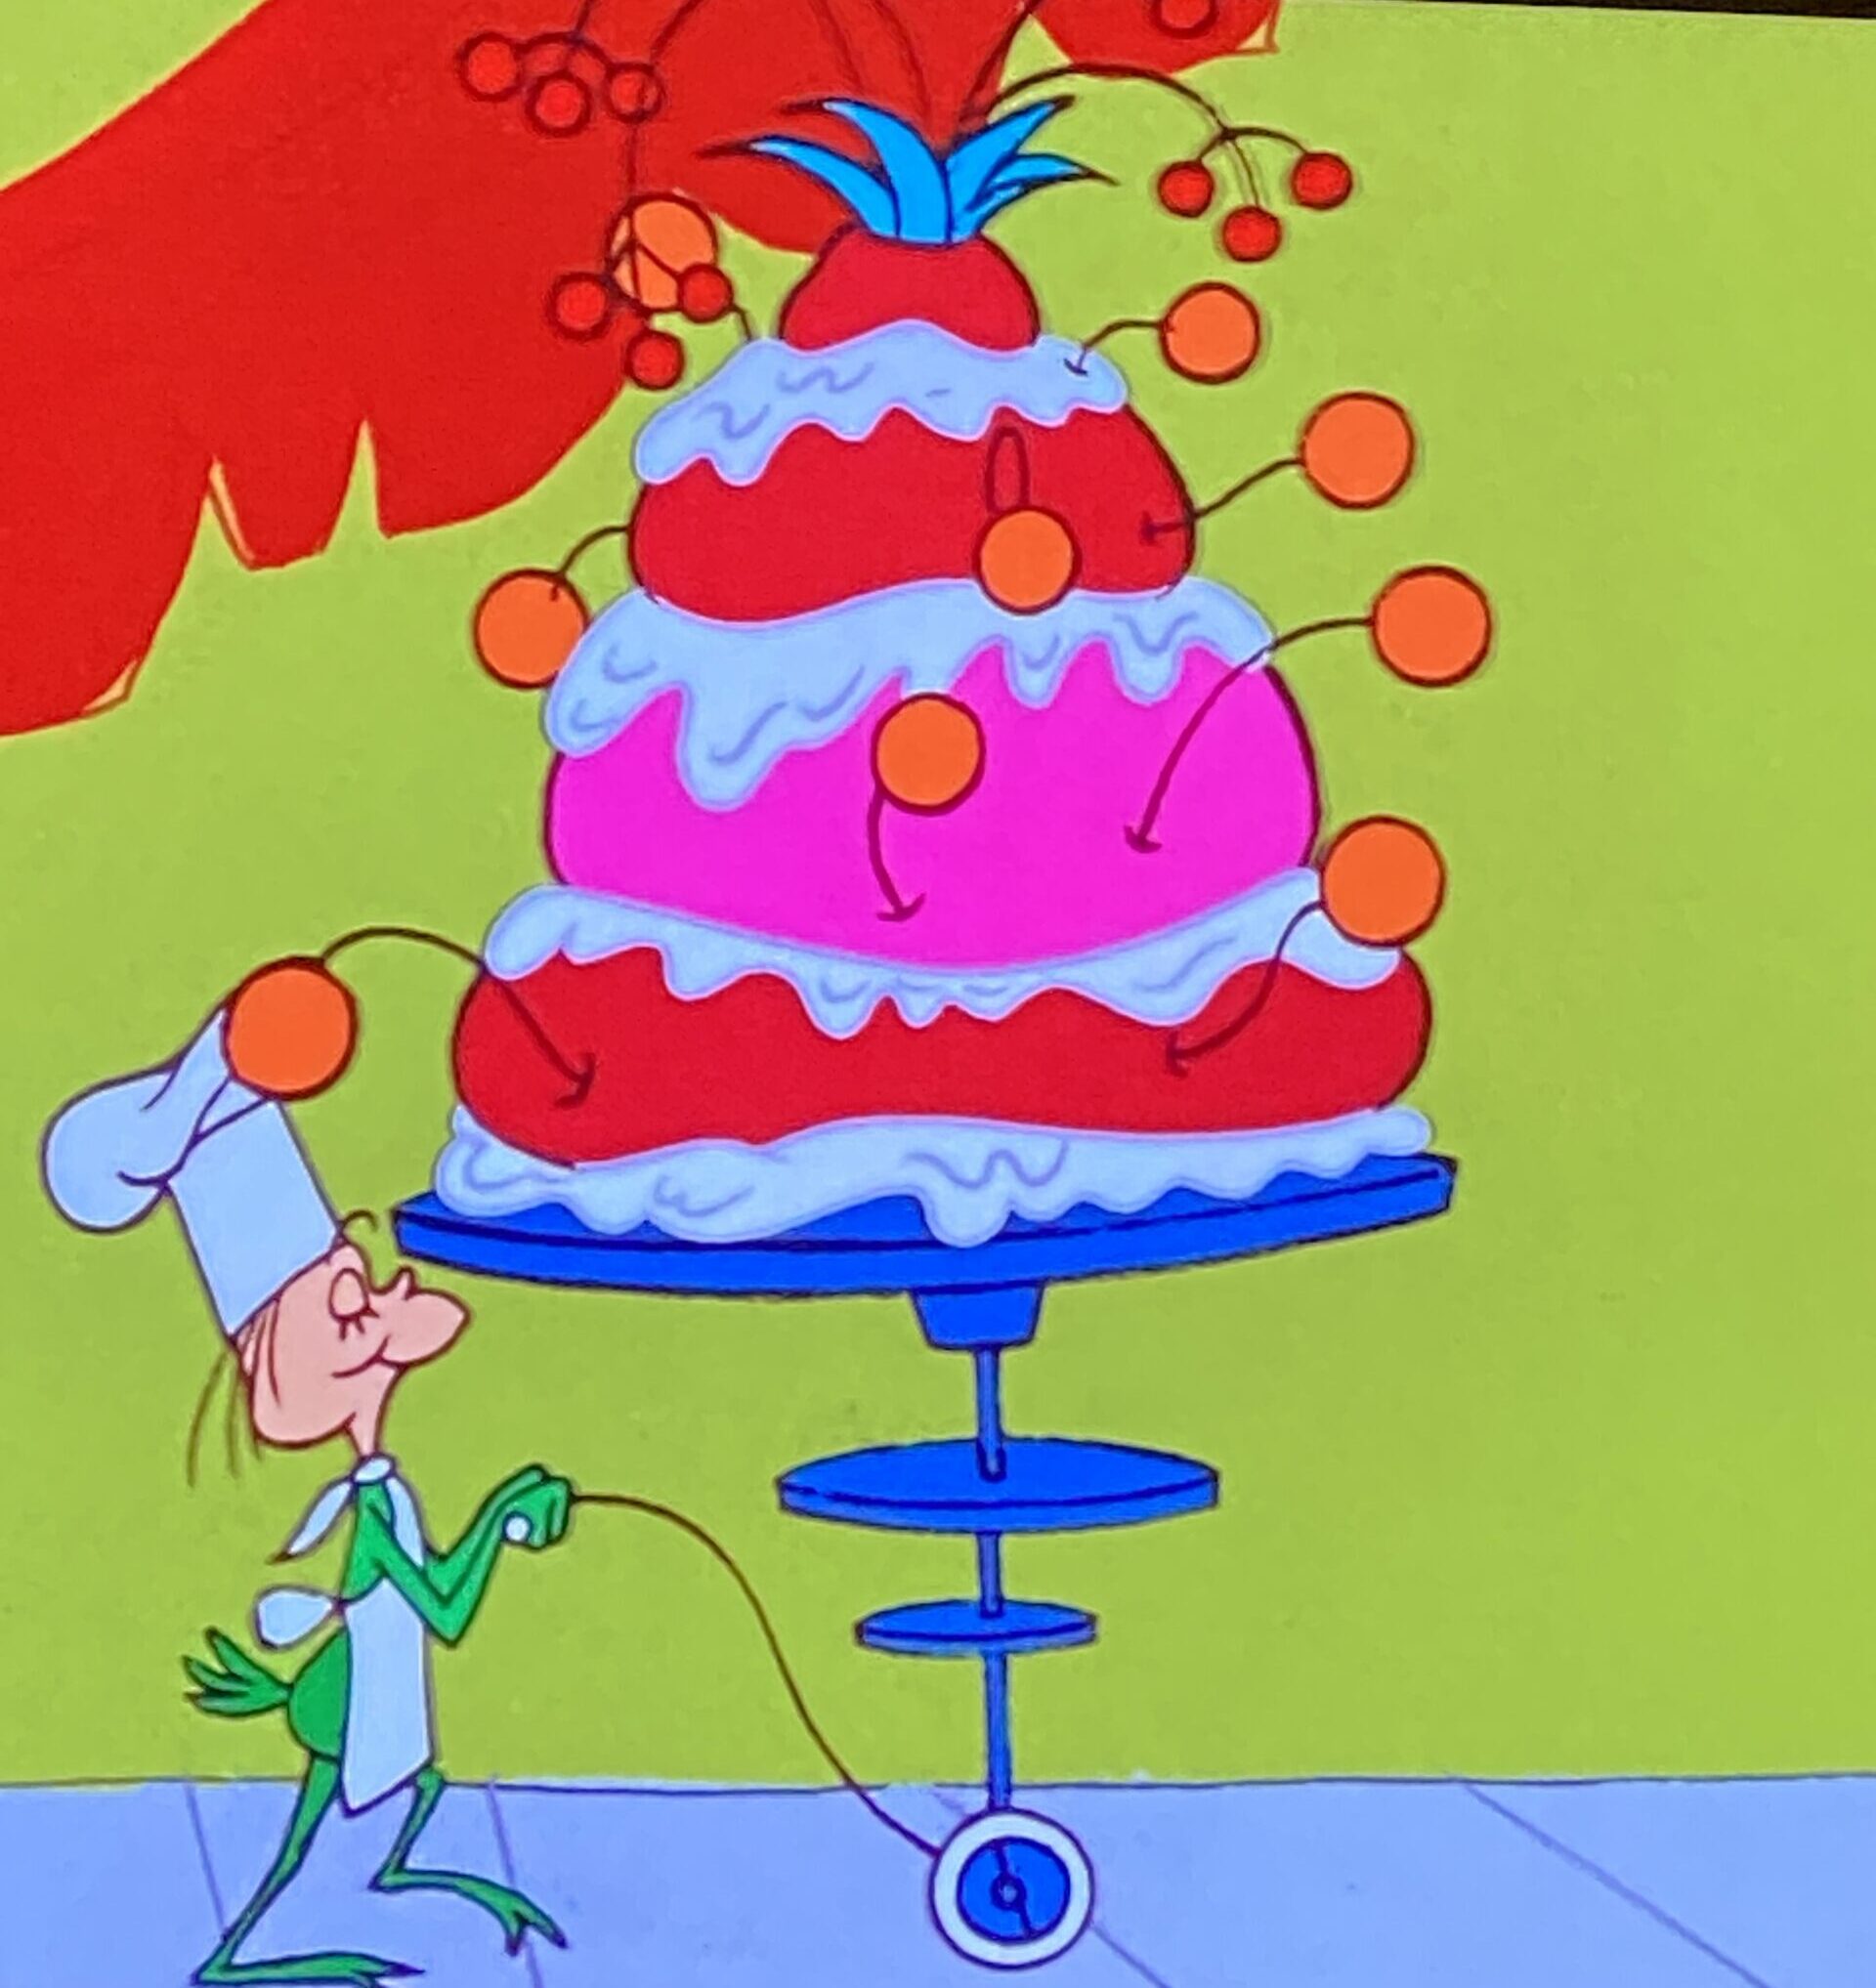 picture of Who pudding in original Grinch movie